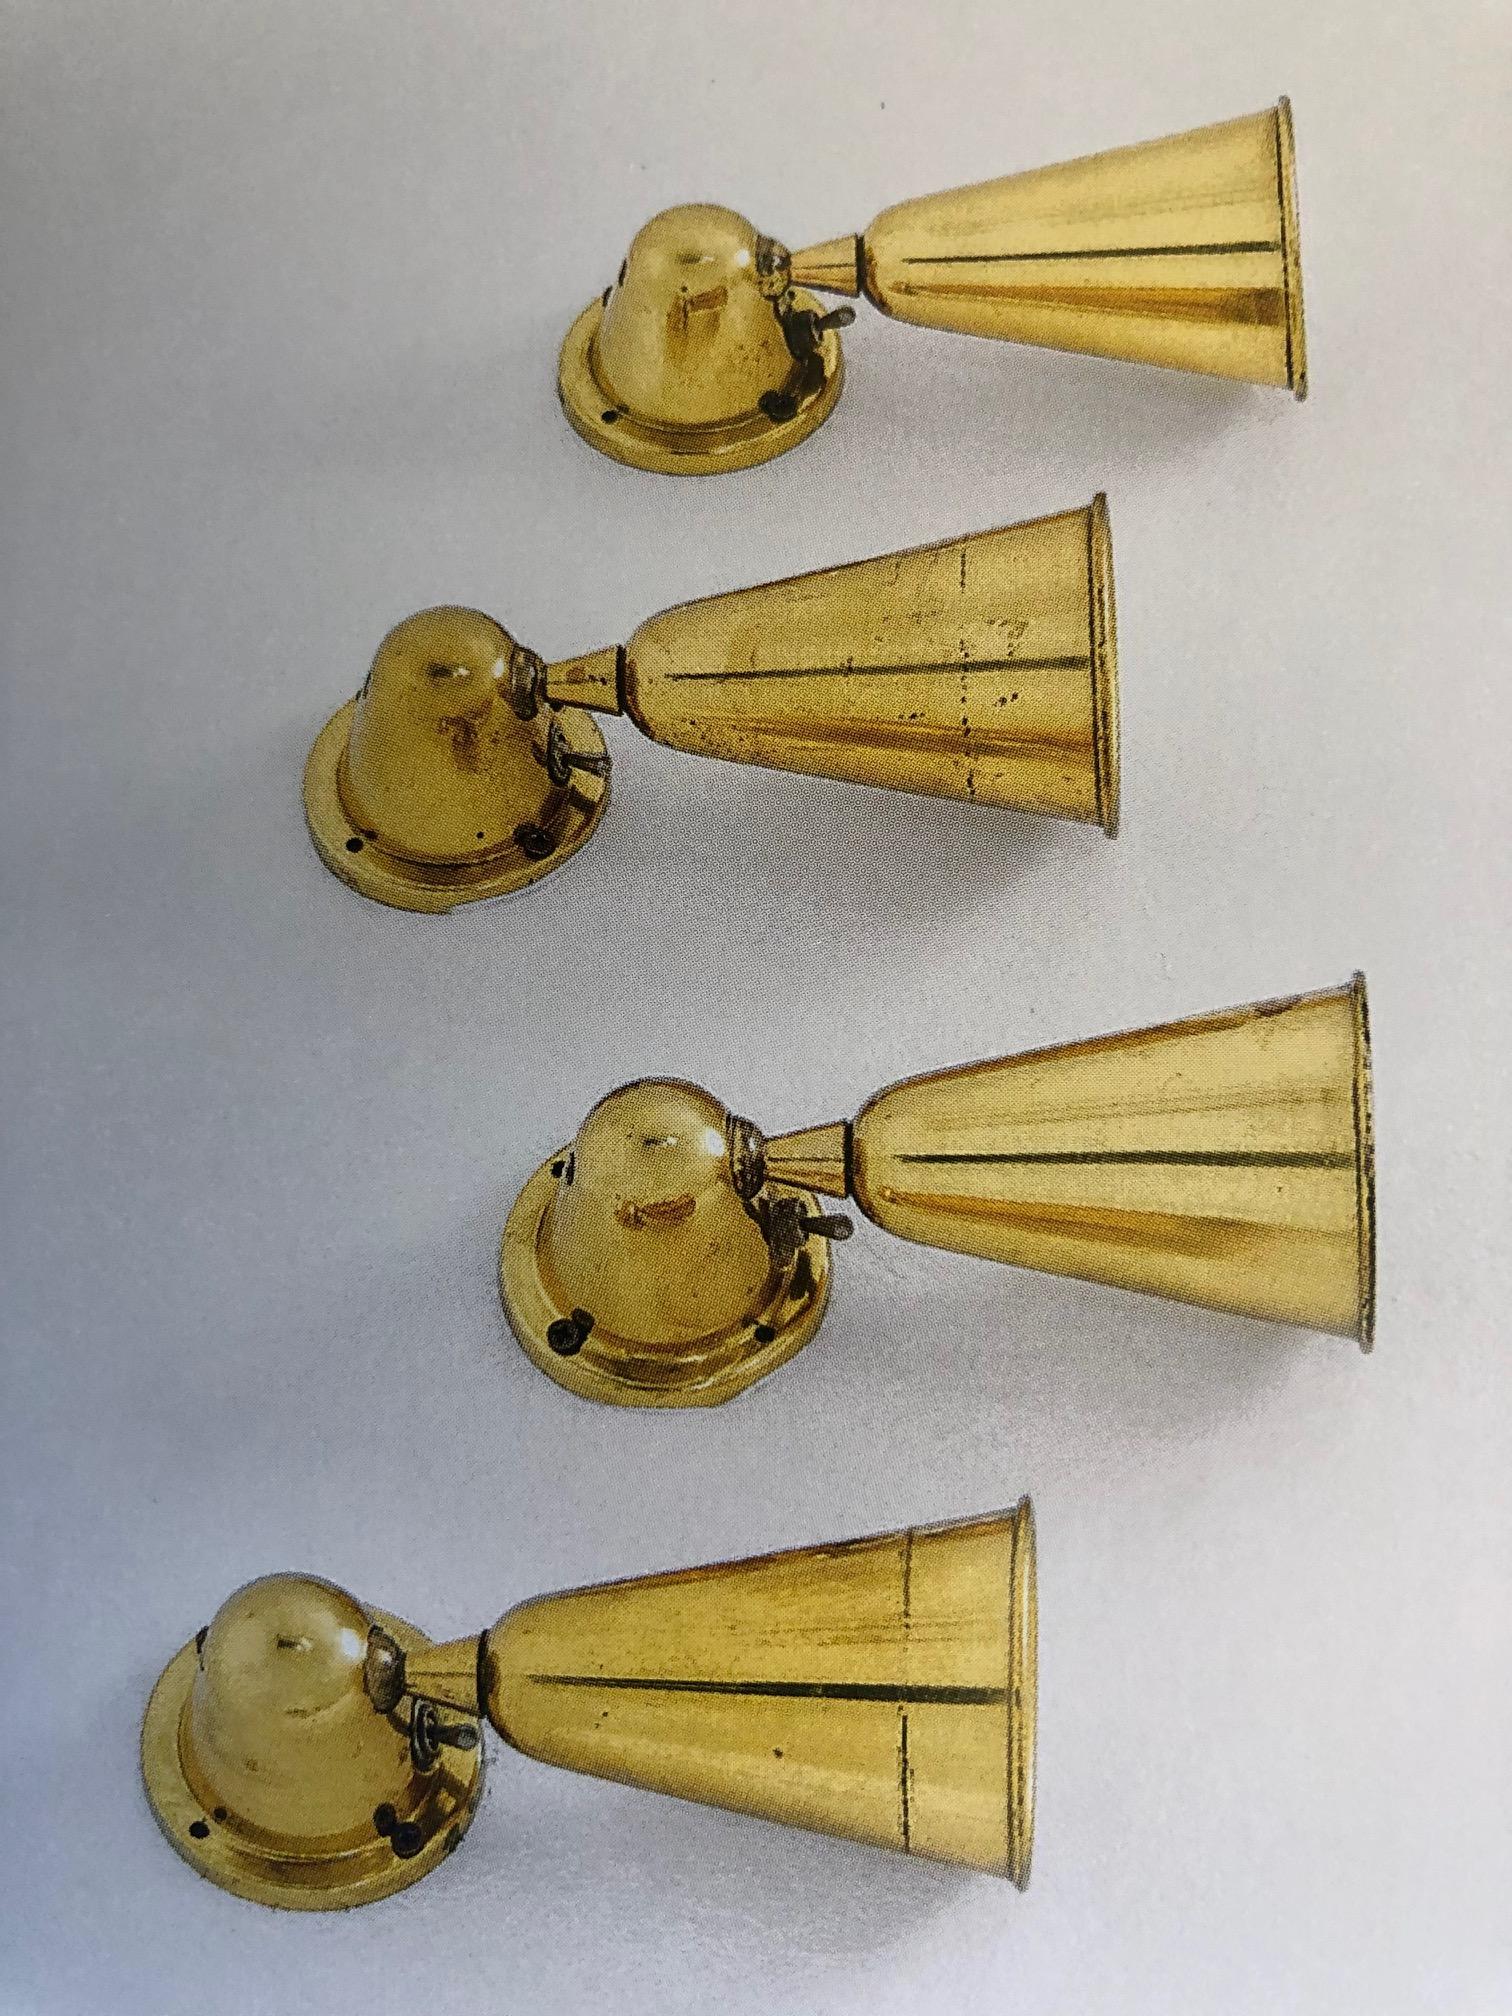 Three pairs of elegant Italian Mid-Century Modern solid brass wall lights in a cone form by Gustavo Pulitzer for Arredoluce. The lights are suitable for bedroom or even as flush mount ceiling fixtures. They will rotate/ articulate as needed.